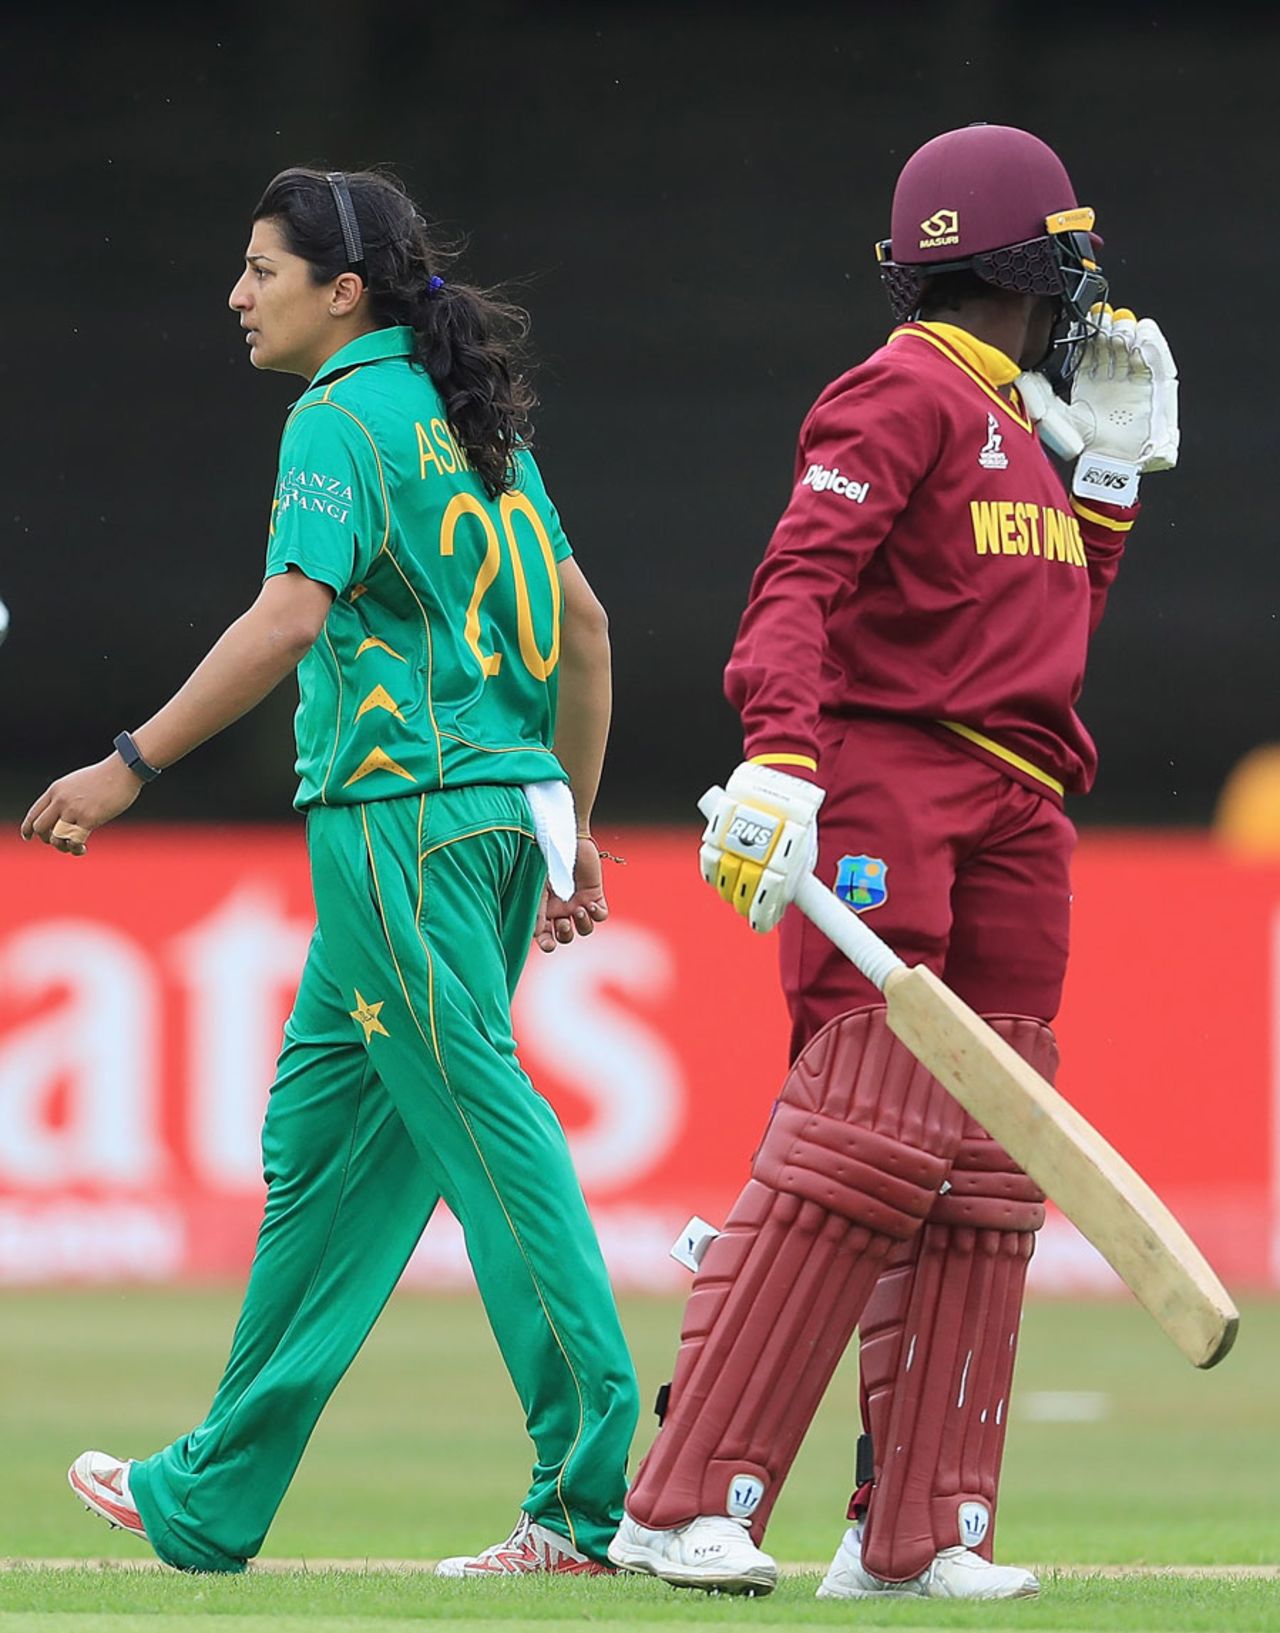 Asmavia Iqbal gave Kycia Knight a send-off after getting her to edge one behind, Pakistan v West Indies, Women's World Cup, Leicester, 11 July 2017